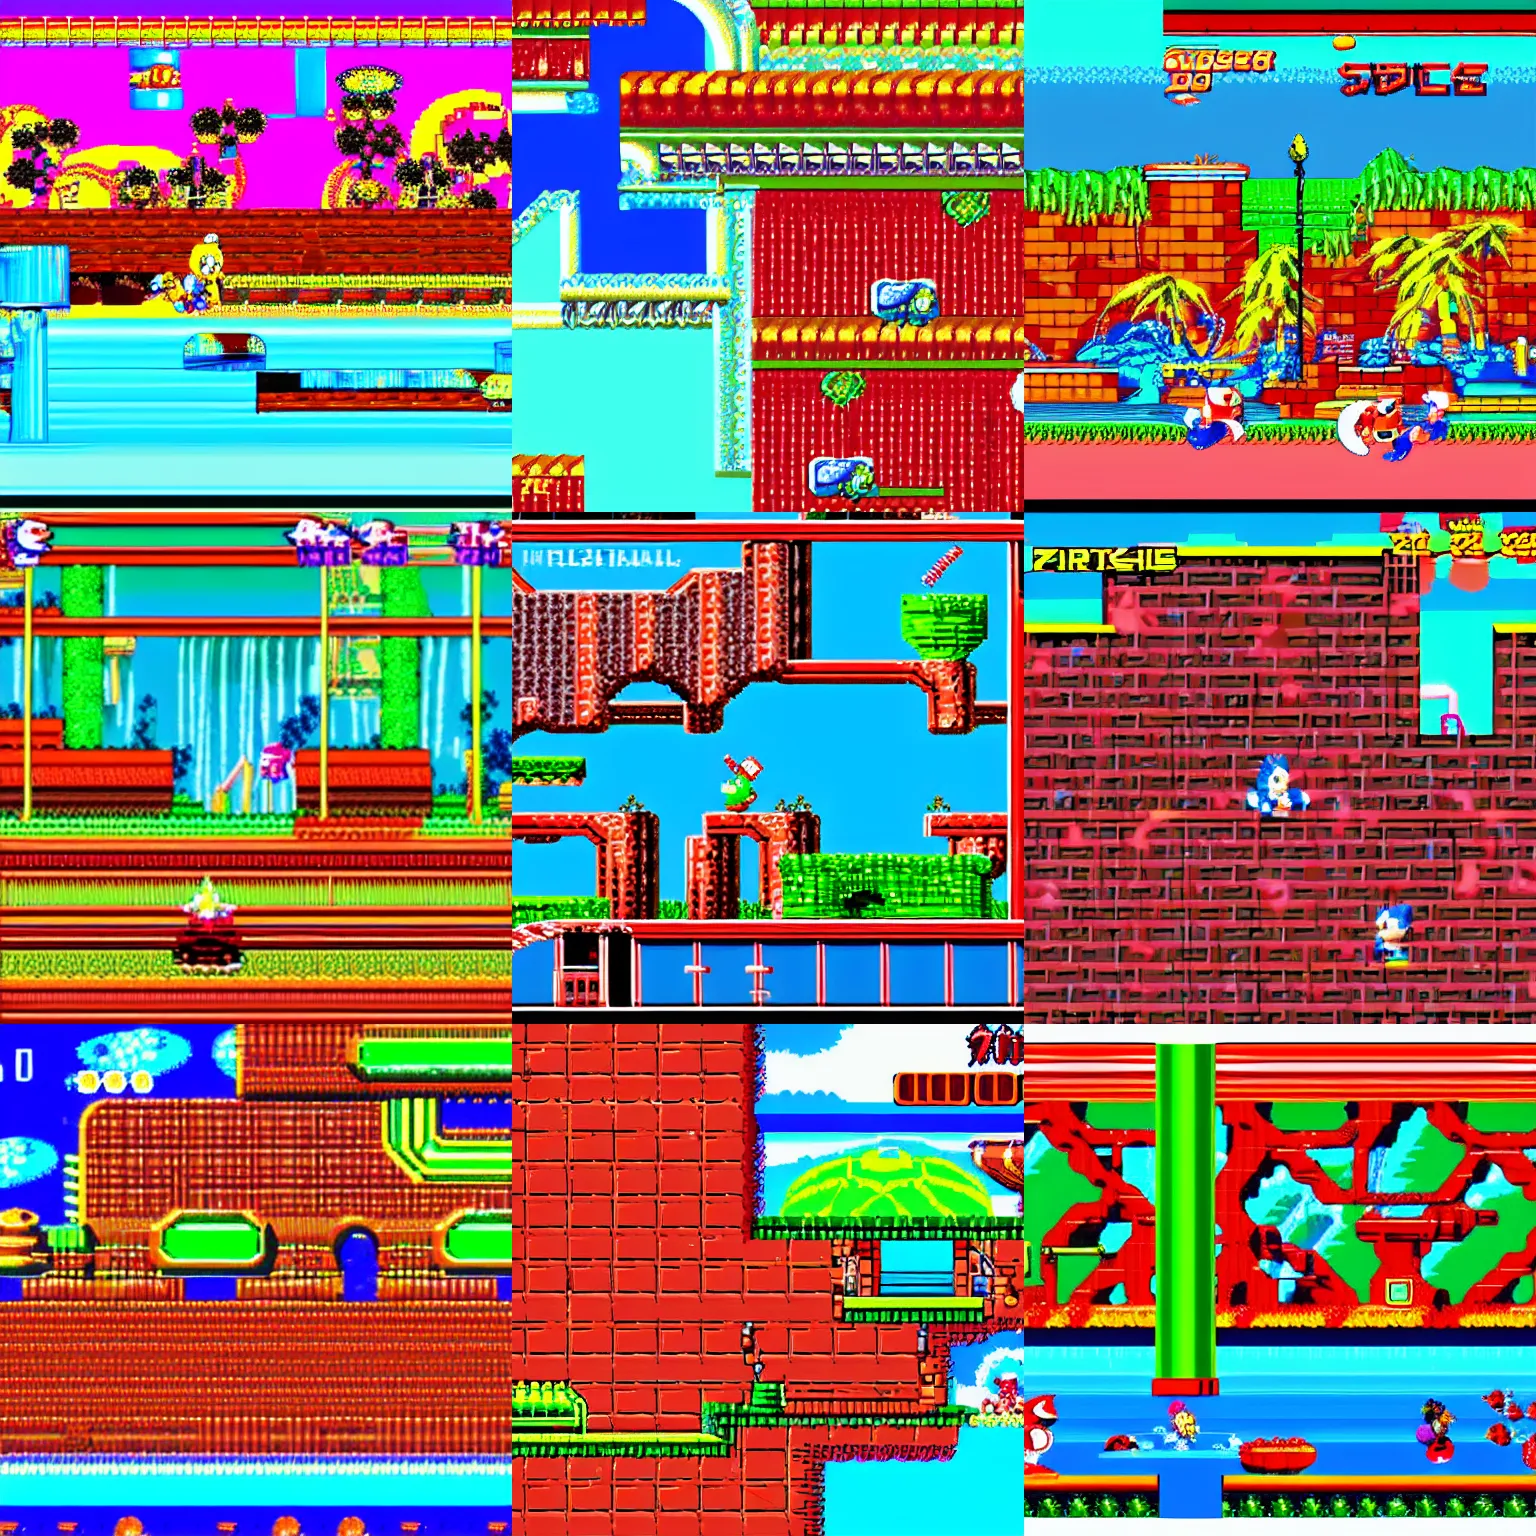 Prompt: Sega Mega Drive screenshot of the Hot Spring Zone from Sonic and Knuckles, gameplay clip